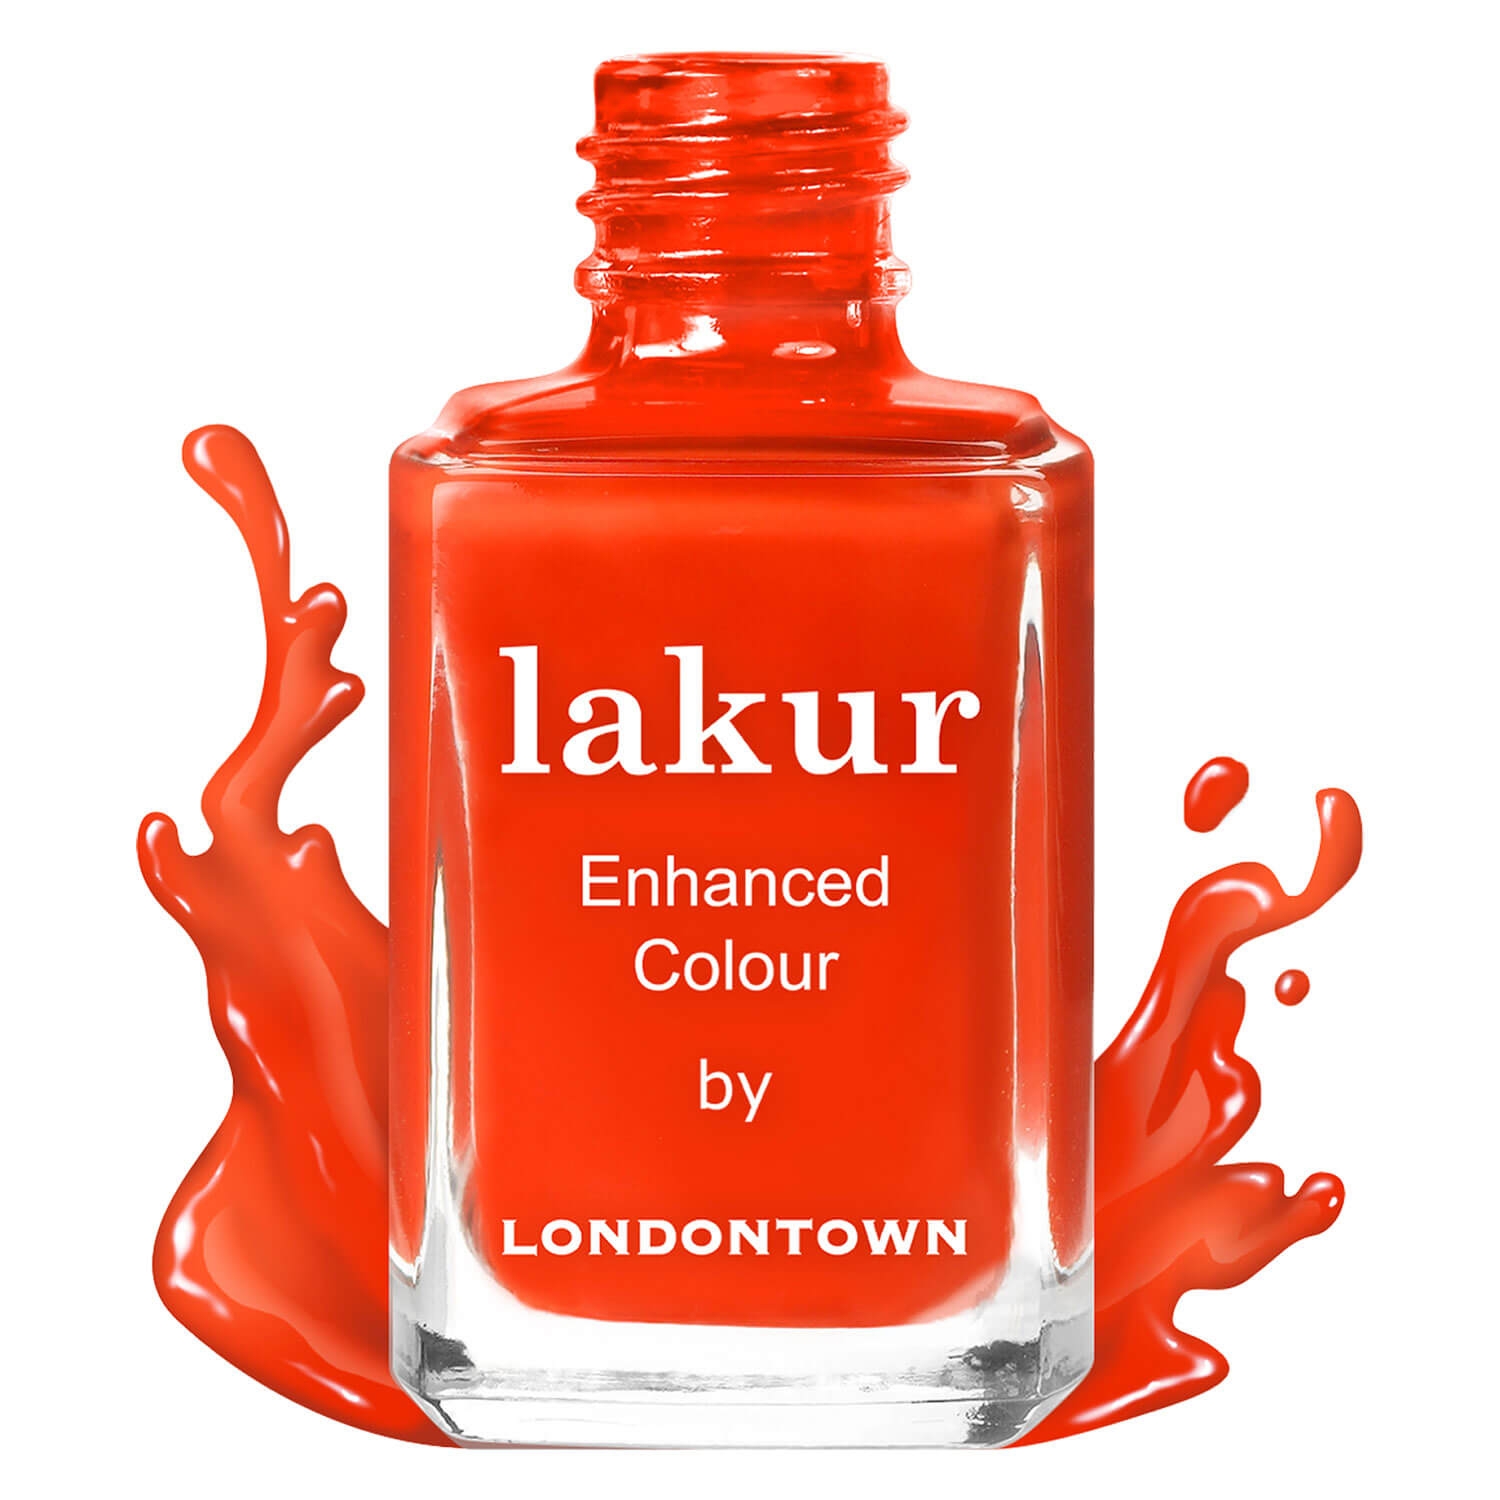 Product image from lakur - Camden Chic